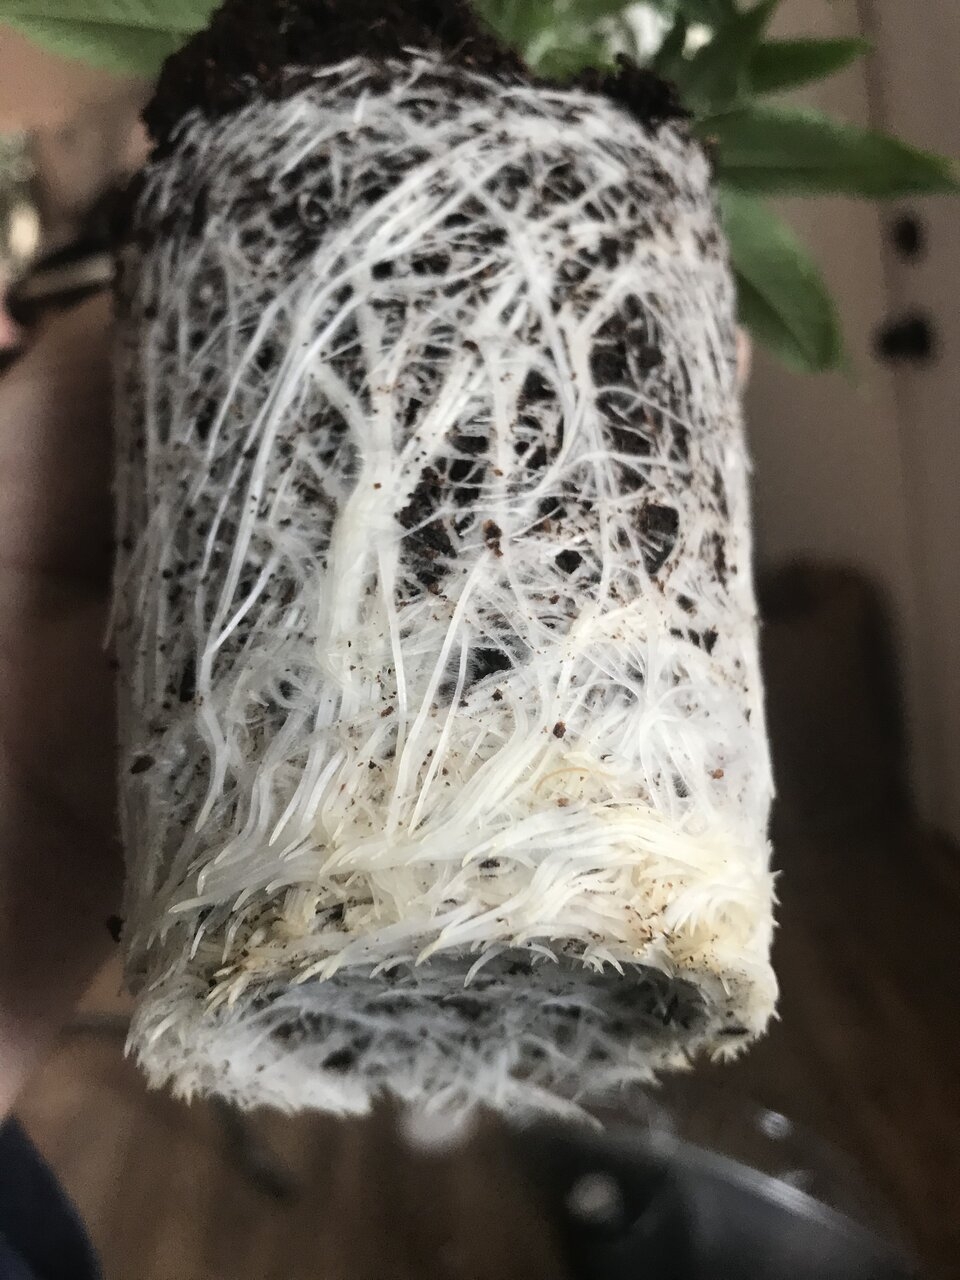 Solo cup roots clones taken on the 5th of Jan